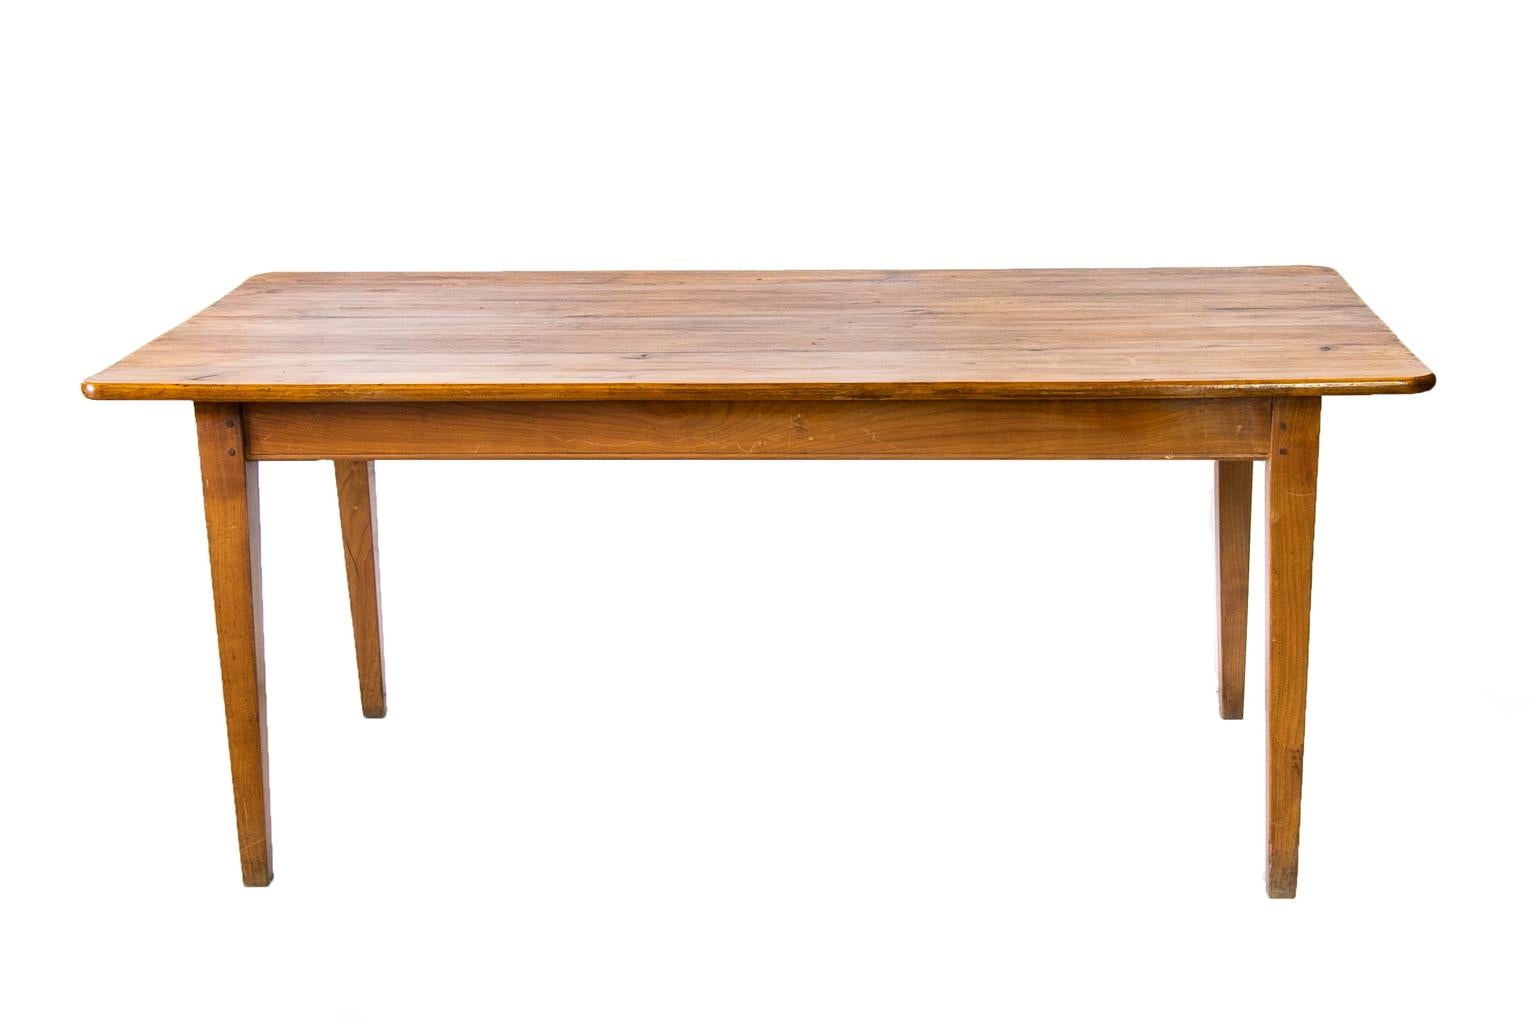 French cherry farm table has double peg construction and bullnose molding at the base of the apron.